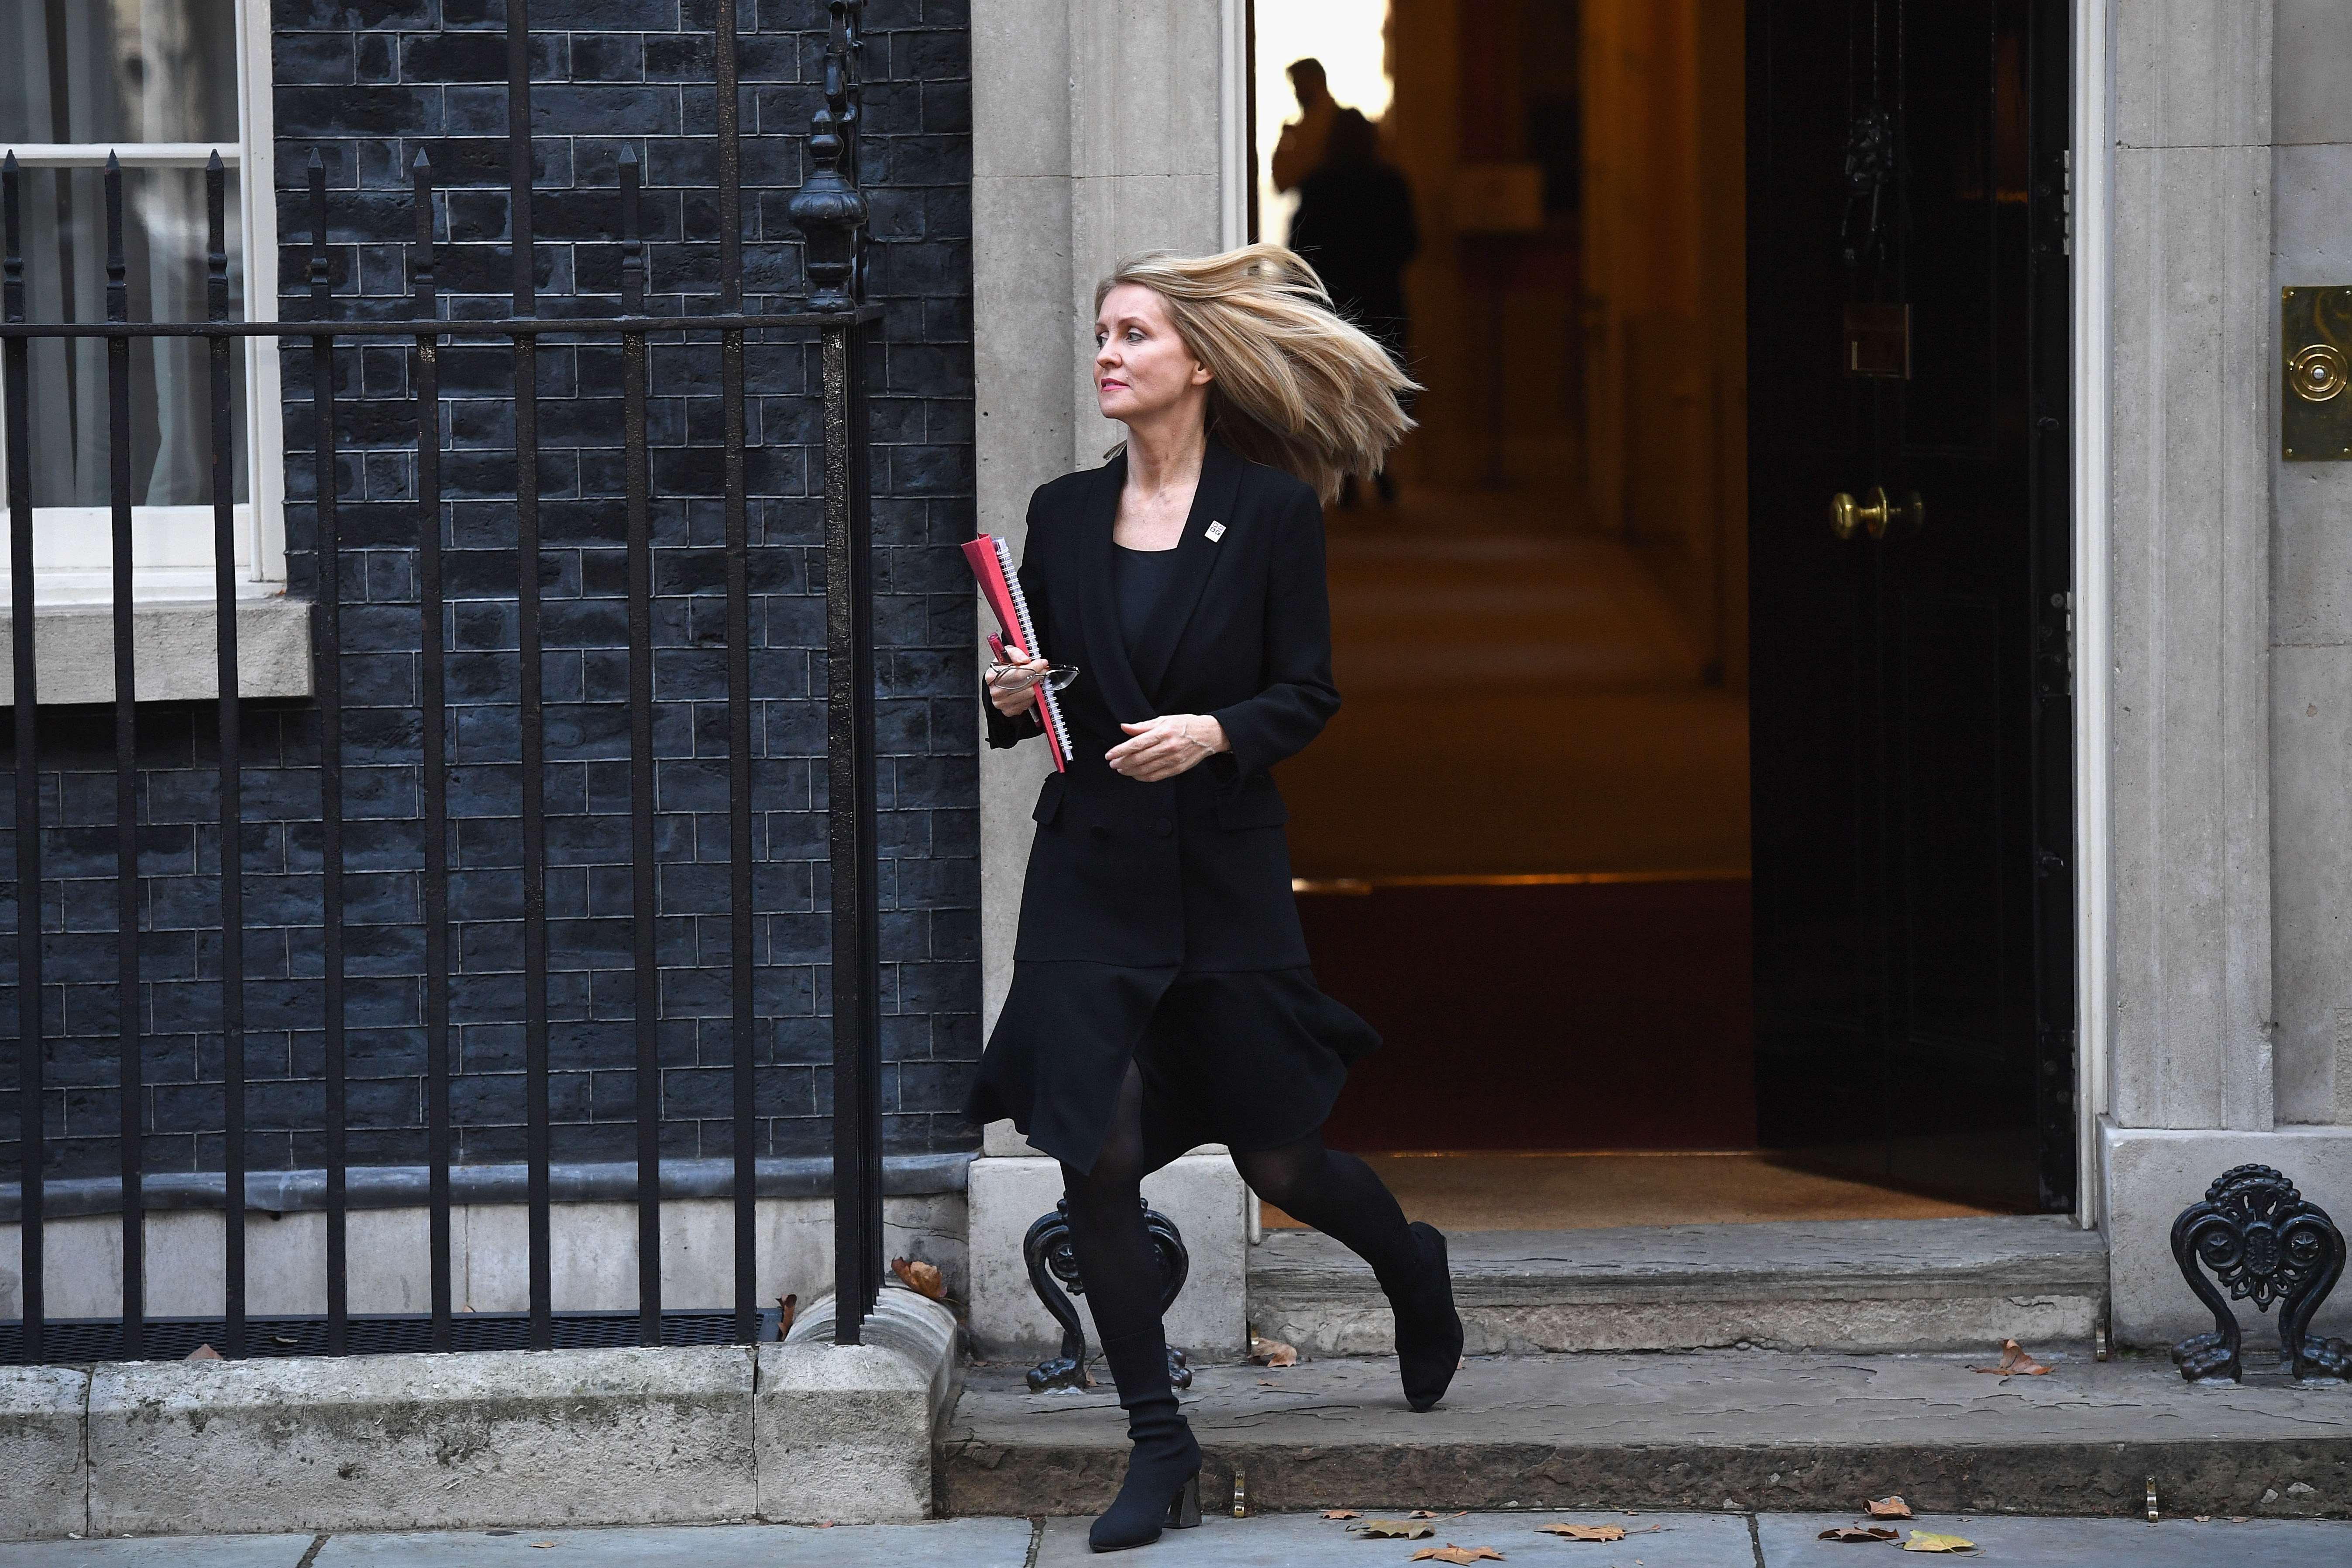 LONDON, ENGLAND - NOVEMBER 13: Work and Pensions Secretary Esther McVey leaves 10 Downing Street on November 13, 2018 in London, England. (Photo by Leon Neal/Getty Images)